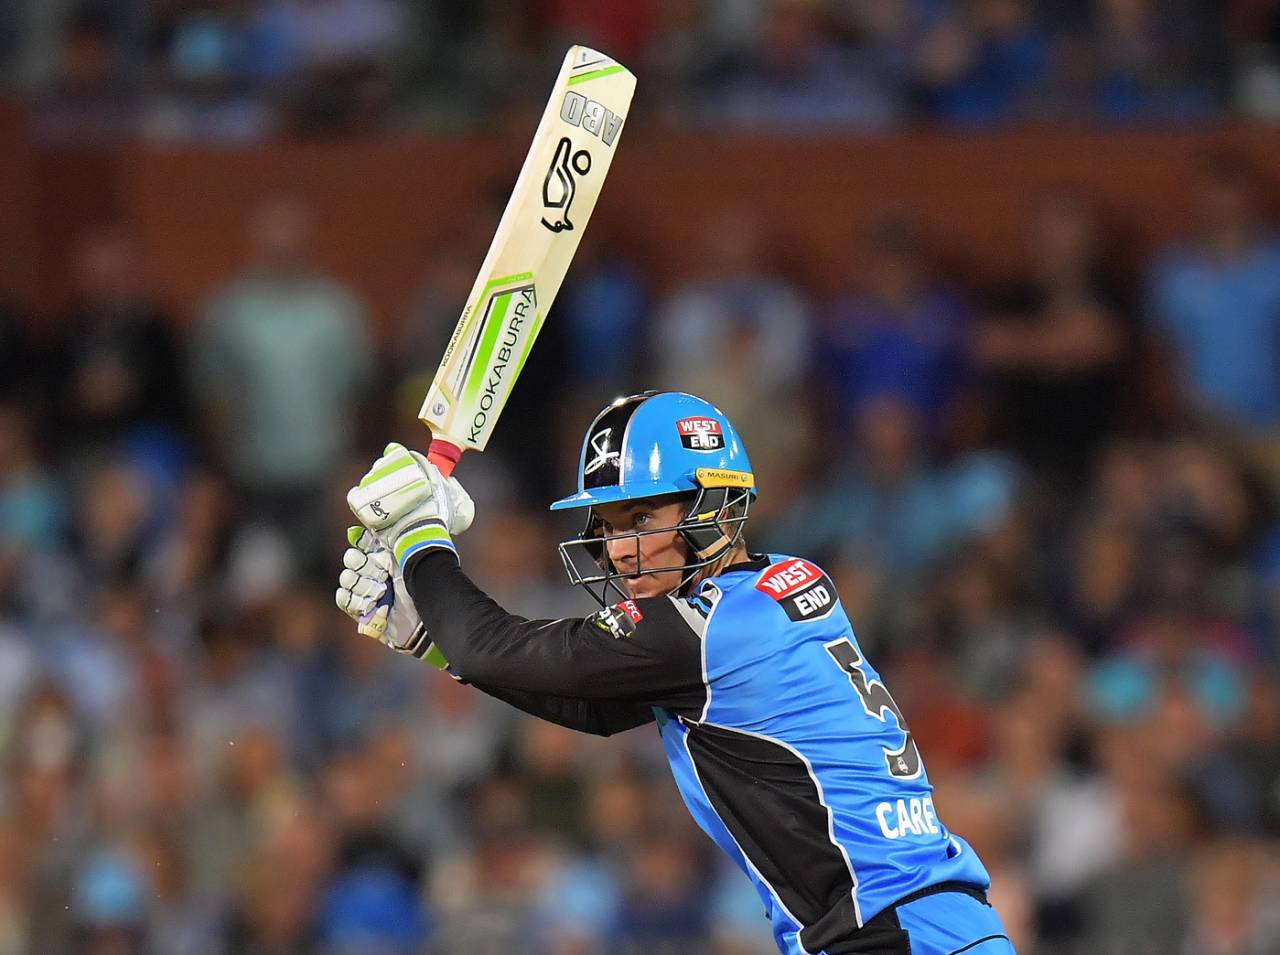 Alex Carey flays one through the off side en route to his half-century, Adelaide Strikers v Melbourne Stars, BBL 2017-18, Adelaide, January 9, 2018